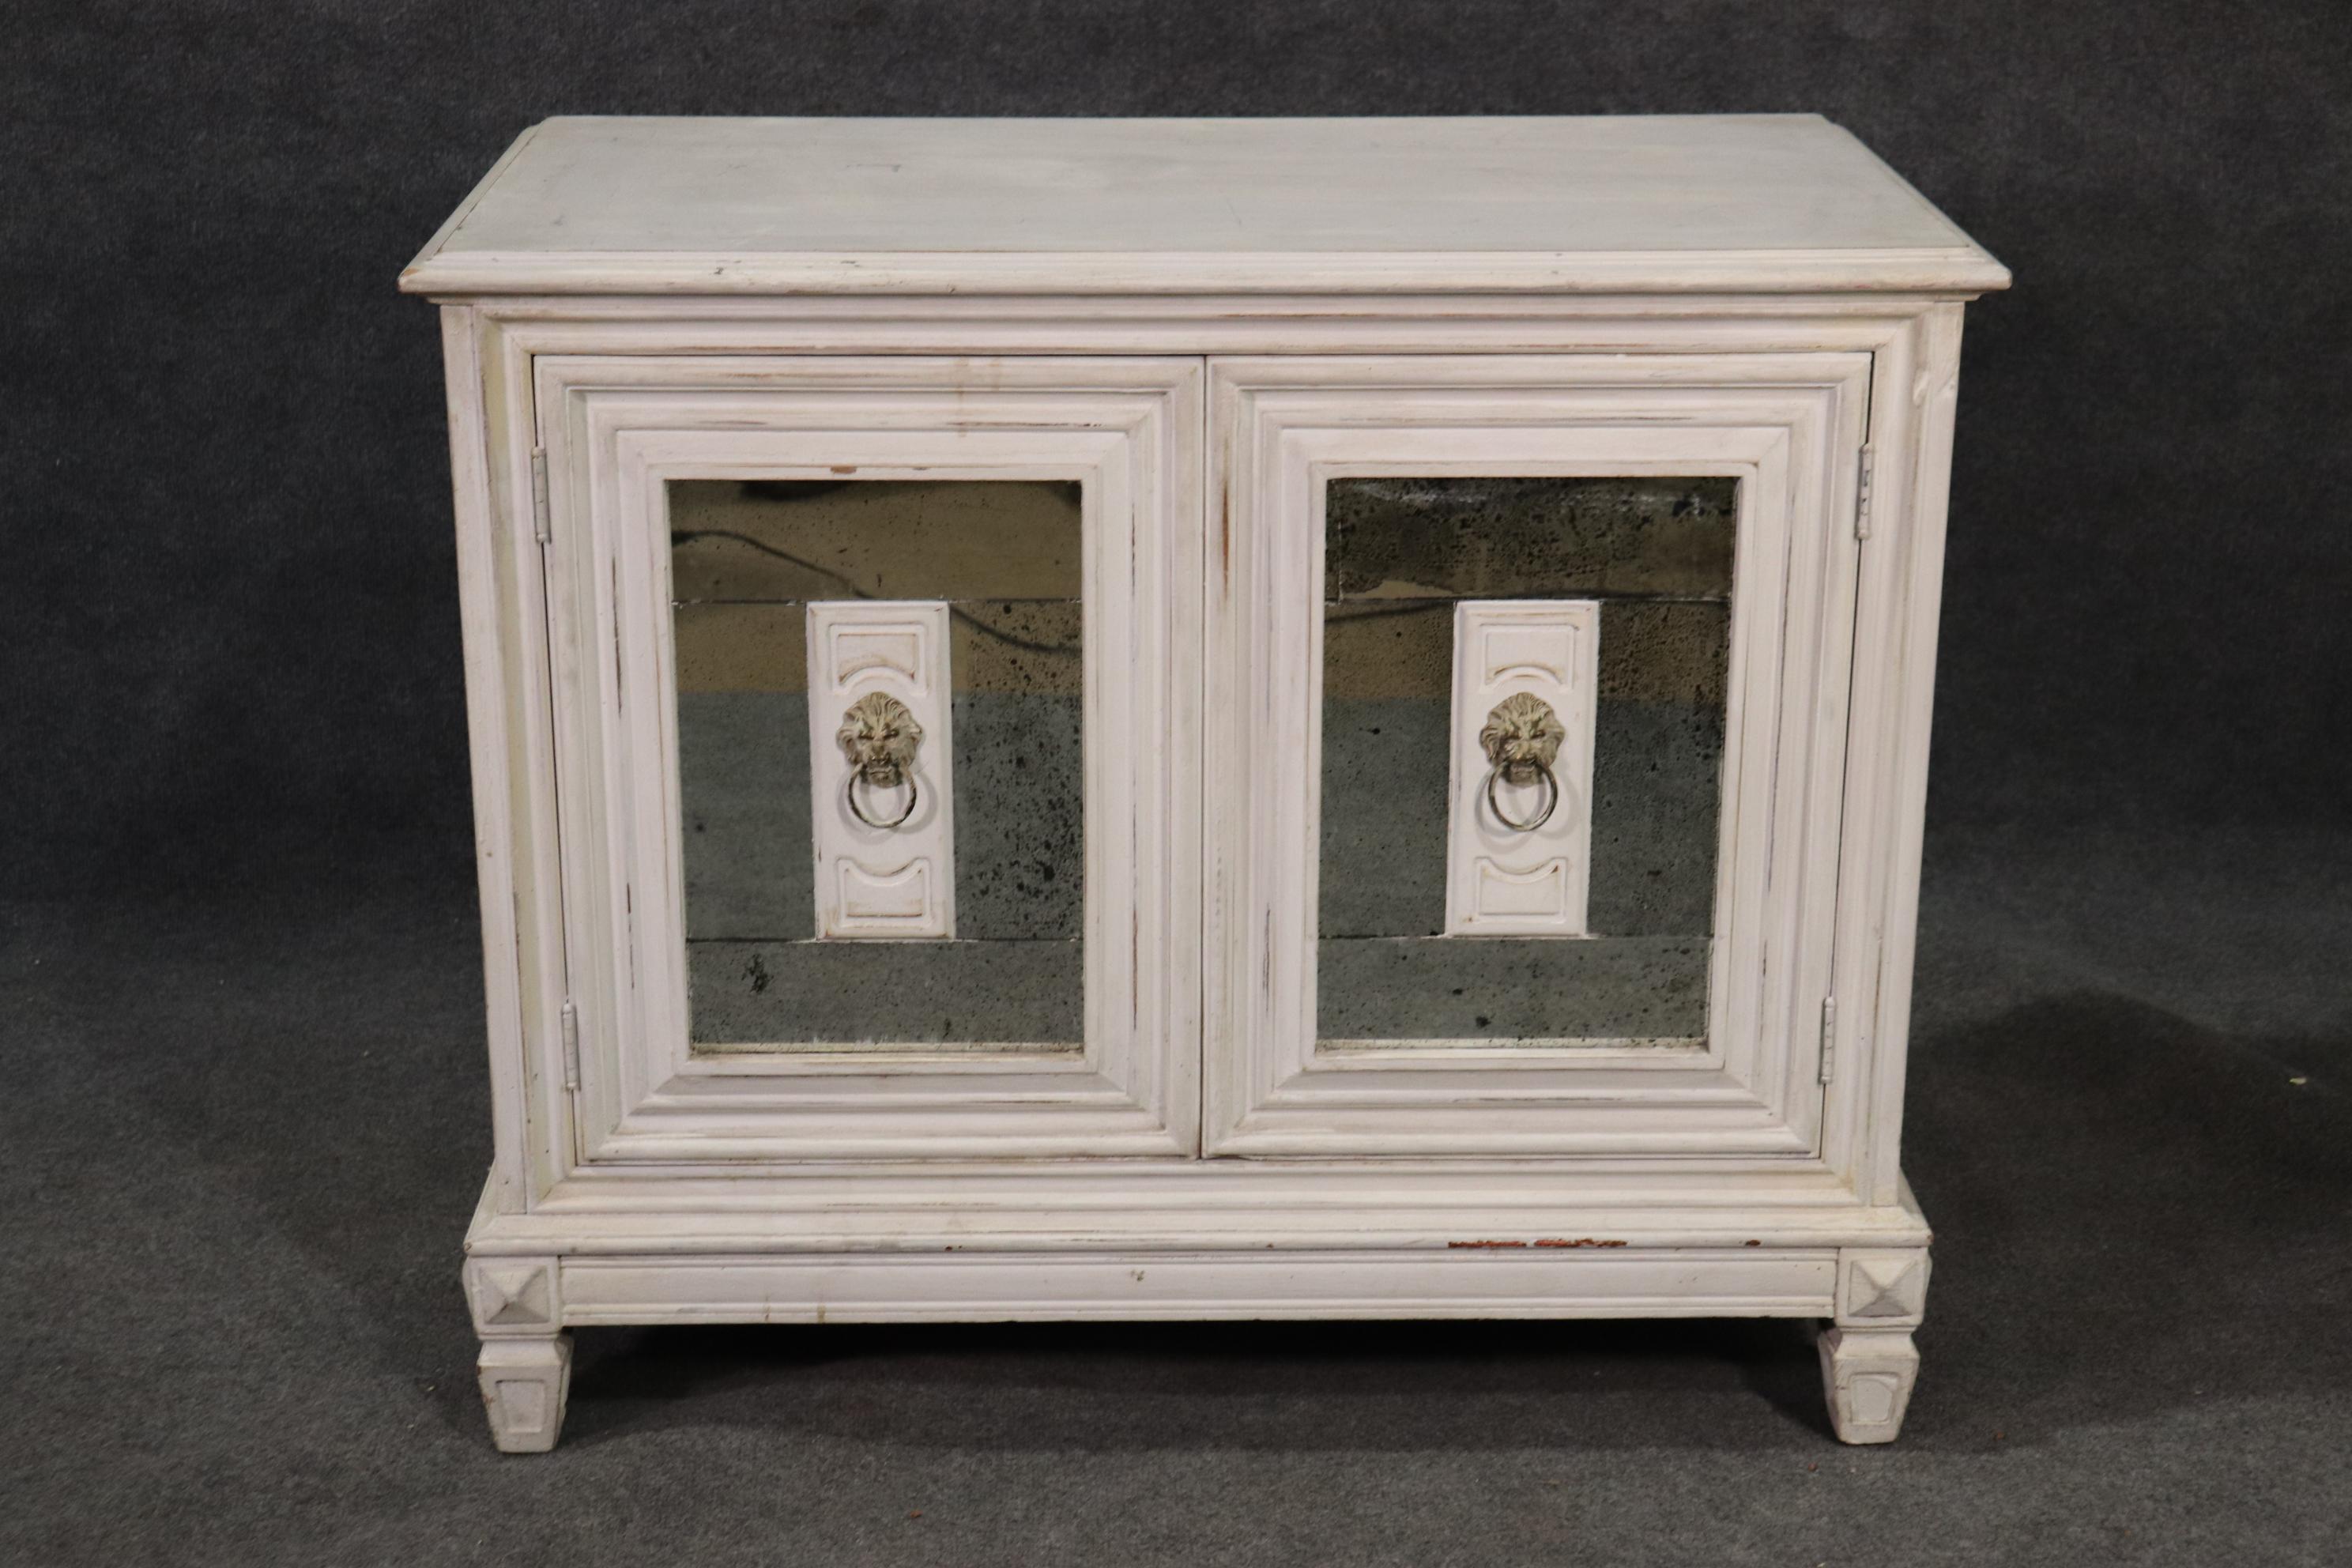 This beautiful commode has a beautiful pair of antique-patinated mirrored panels and a white distress painted background. The cabinet measures 32 tall x 38 wide x 20 deep.